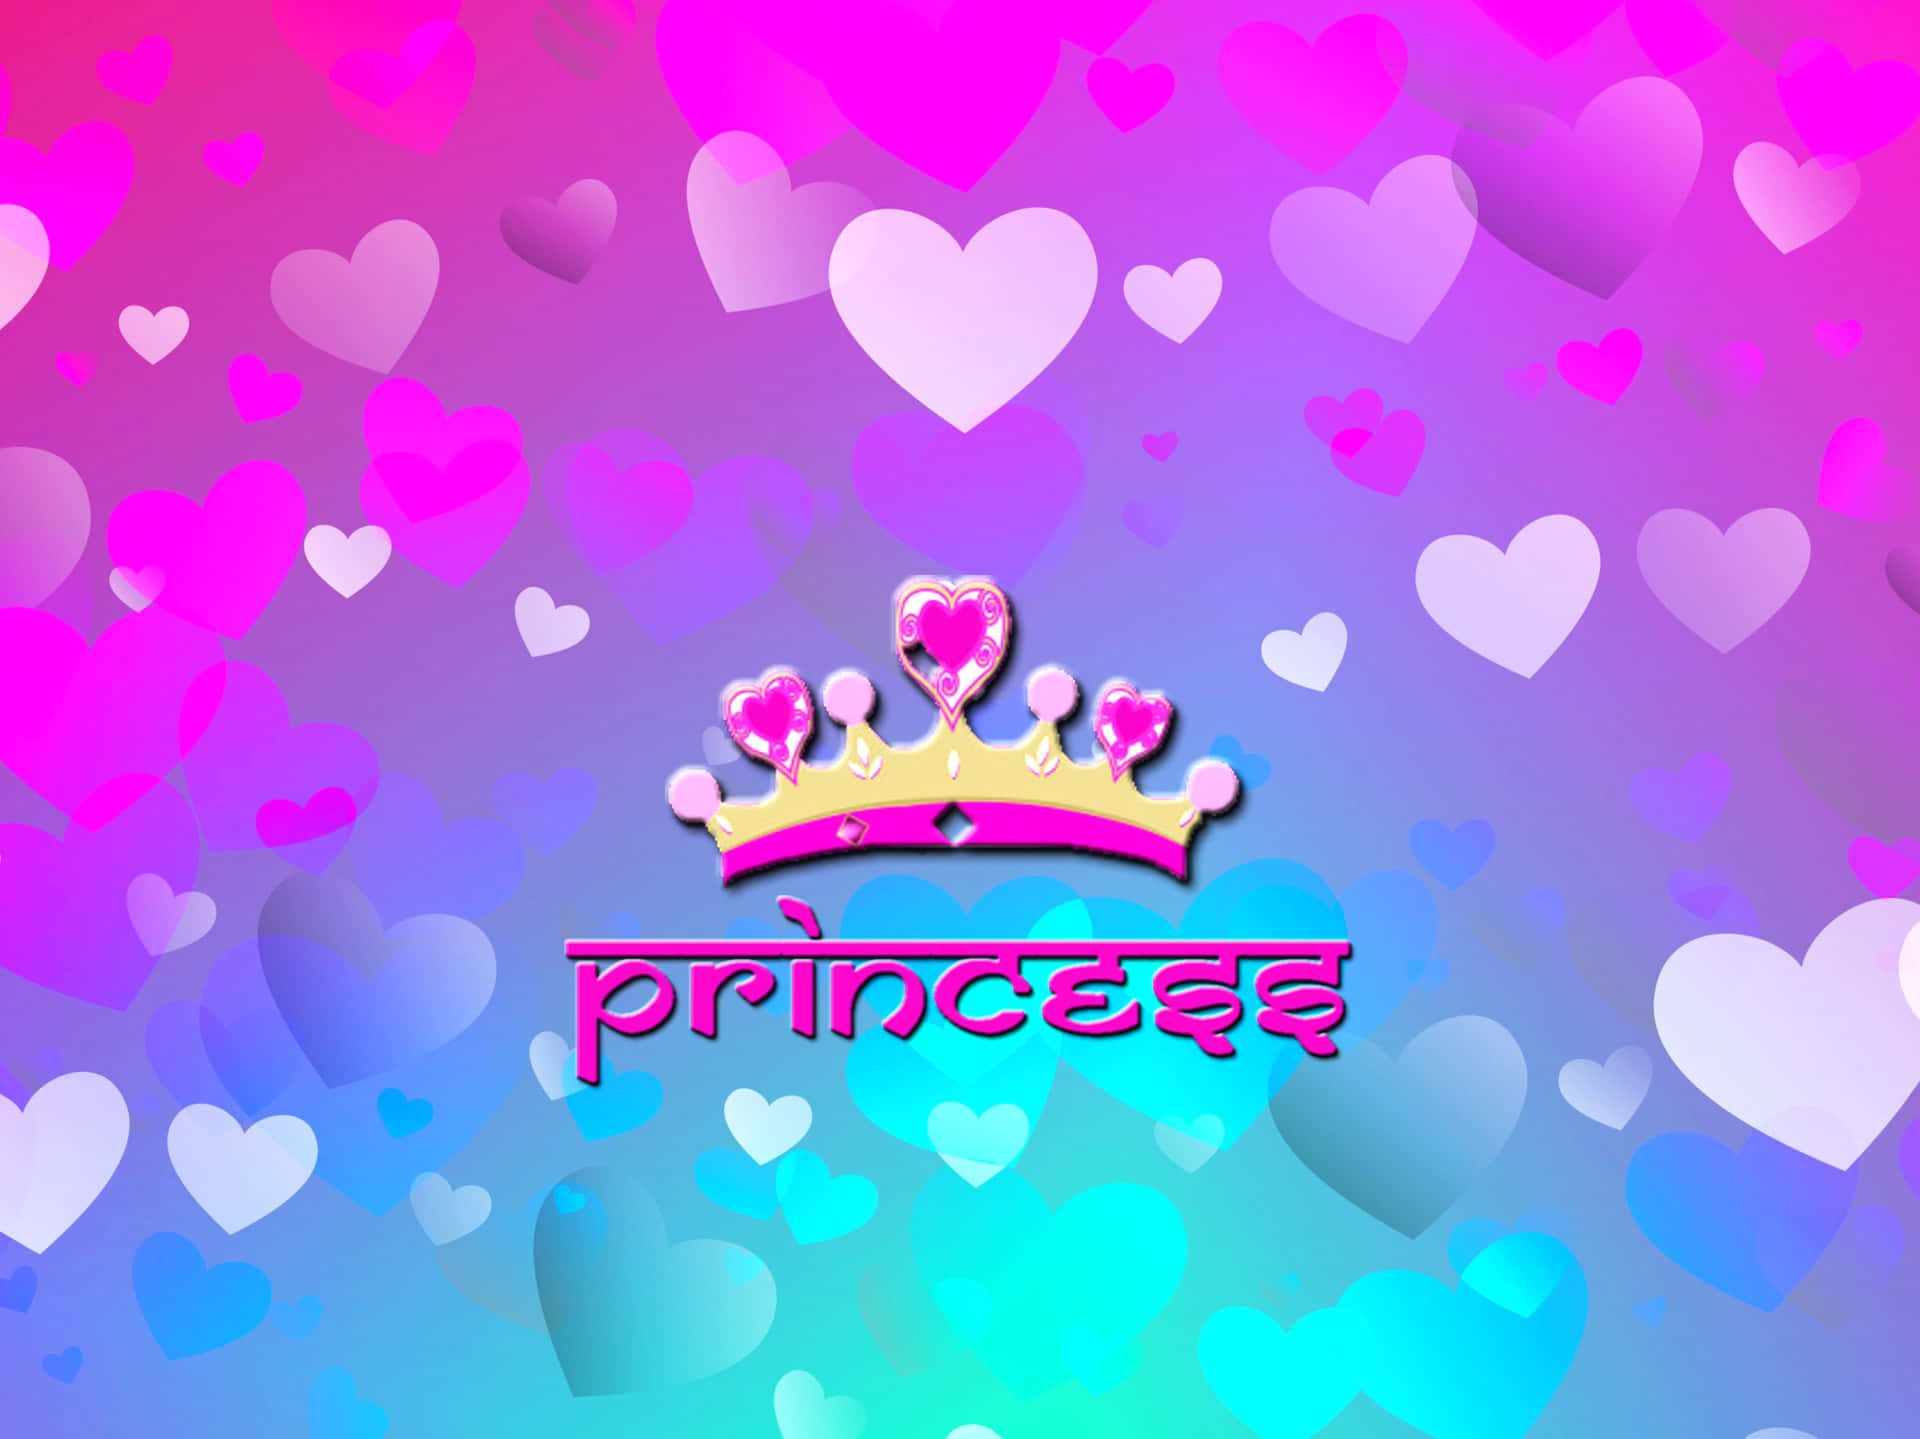 A beautiful princess crown adorned with colorful rhinestones. Wallpaper